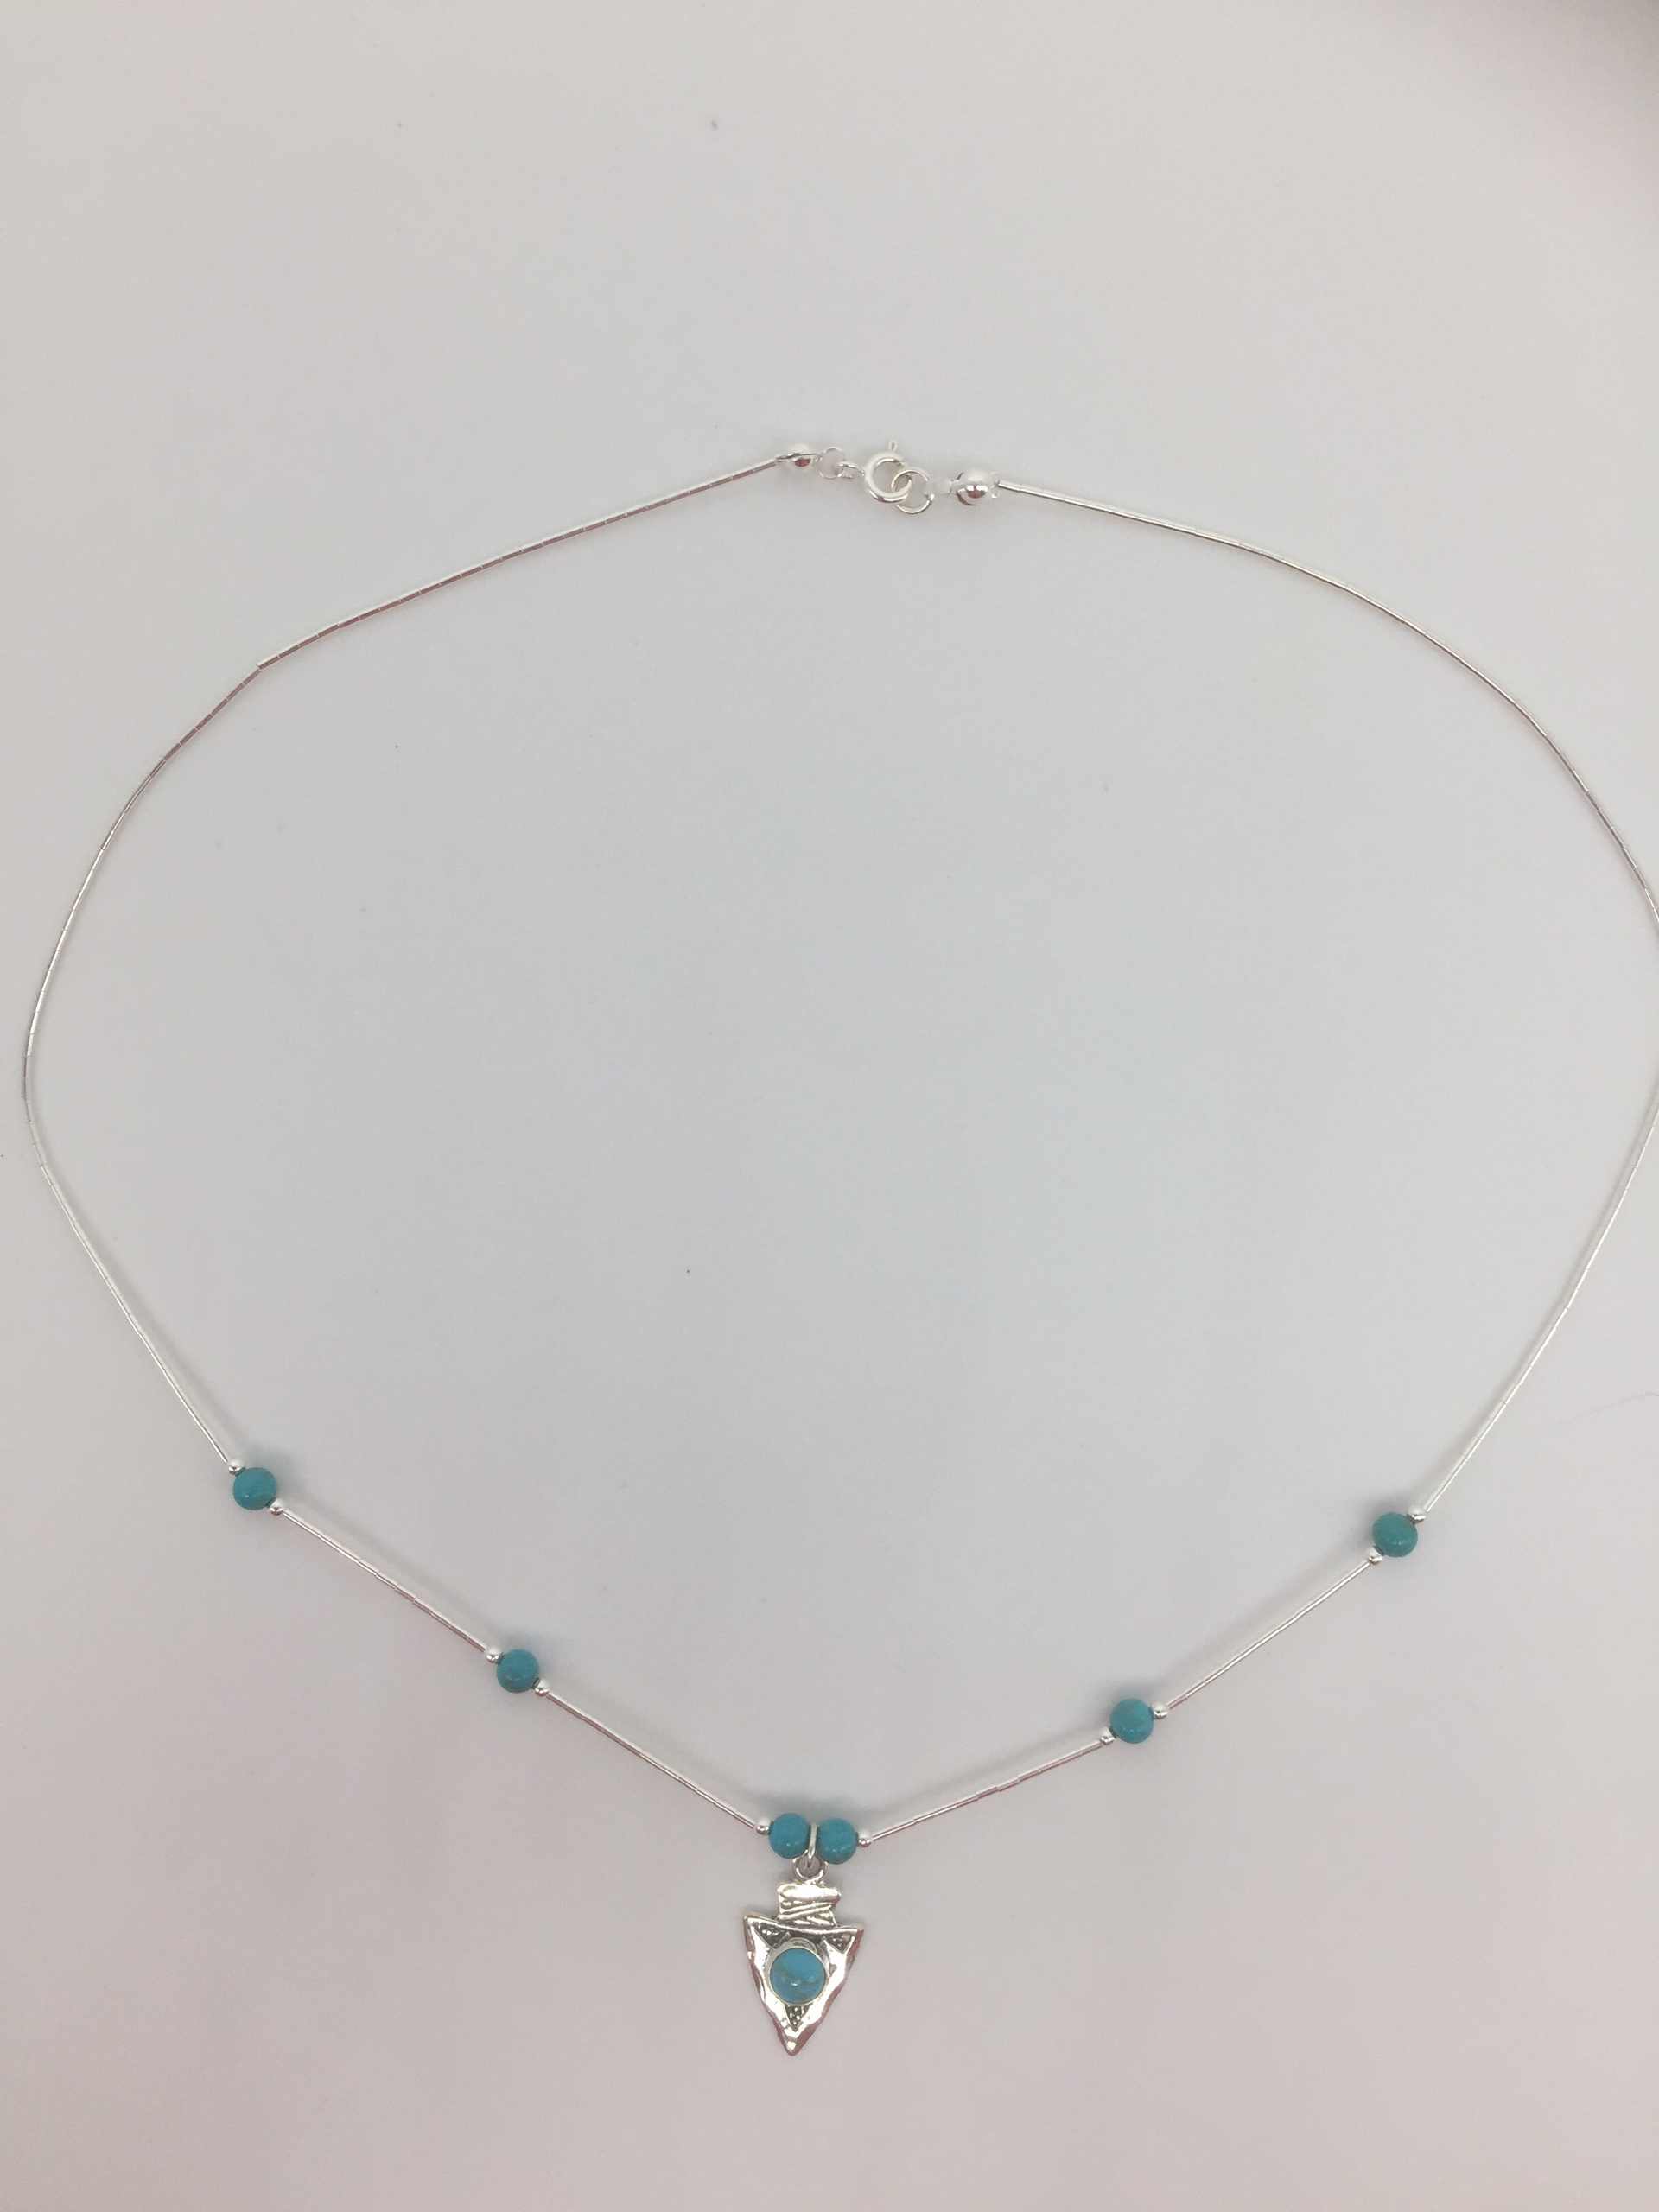 Turquoise Chain/Pendant/Necklace